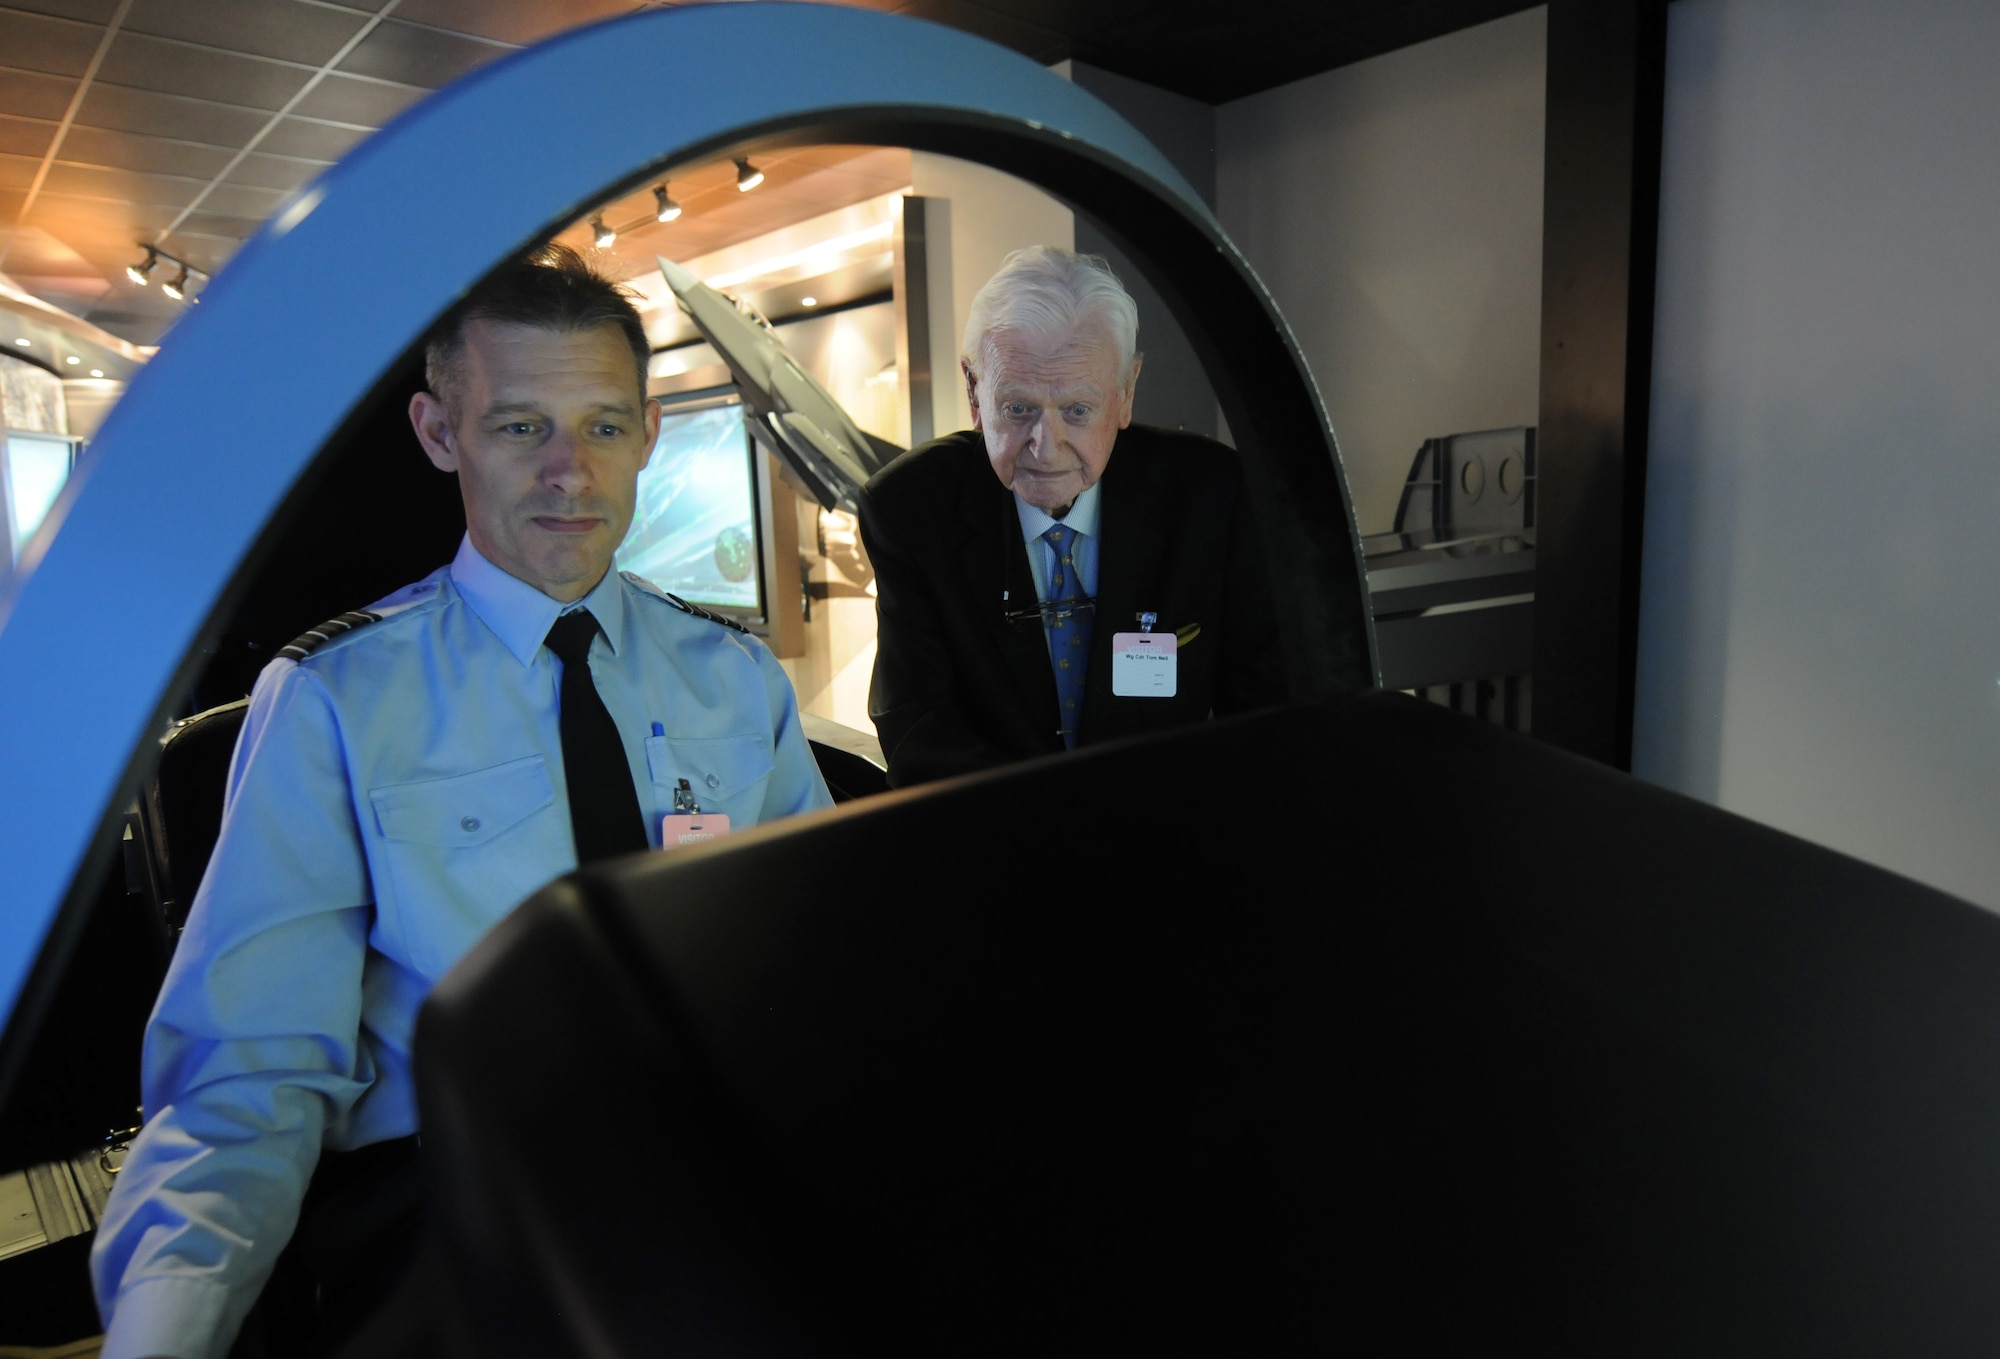 British Capt. Peter “Willy” Hatchett, attached to the F-35 Joint Strike Fighter Program, uses an F-35 simulator to show Tom "Ginger" Neil, a renowned World War II flying ace, the capabilities of the aircraft inside the Lockheed Martin office in Arlington, Va., on Oct. 7, 2015. (U.S. Air Force photo/Sean Kimmons)